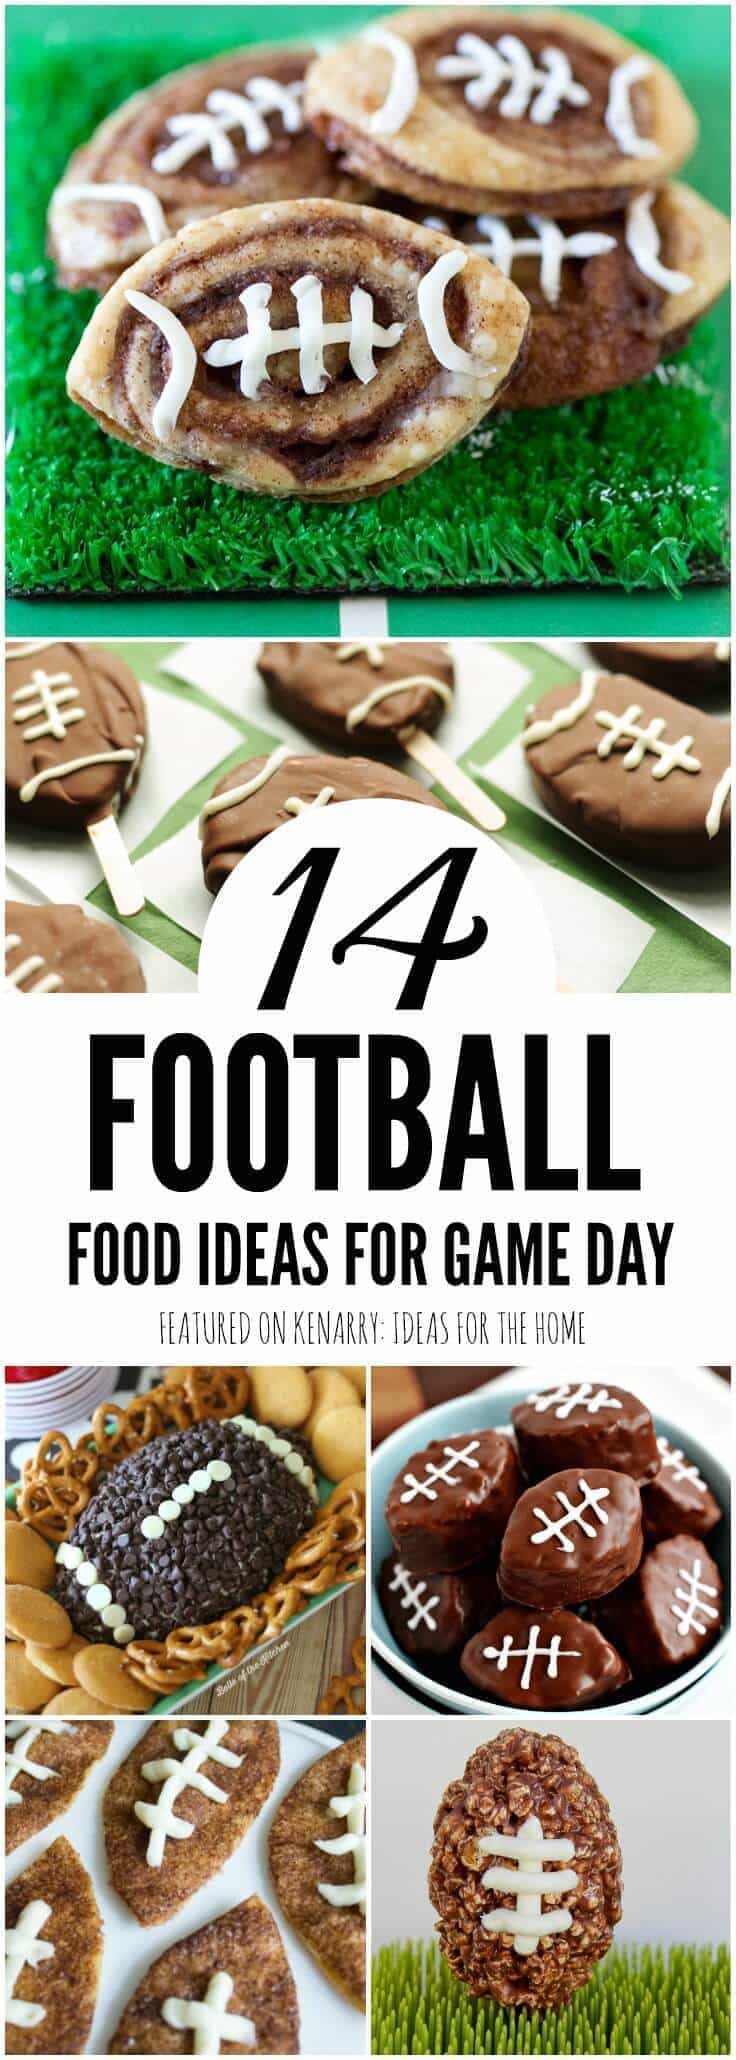 I love all these football shaped food ideas! I can't wait to try to some of these fun recipes for game day, tailgating - and even the Super Bowl!